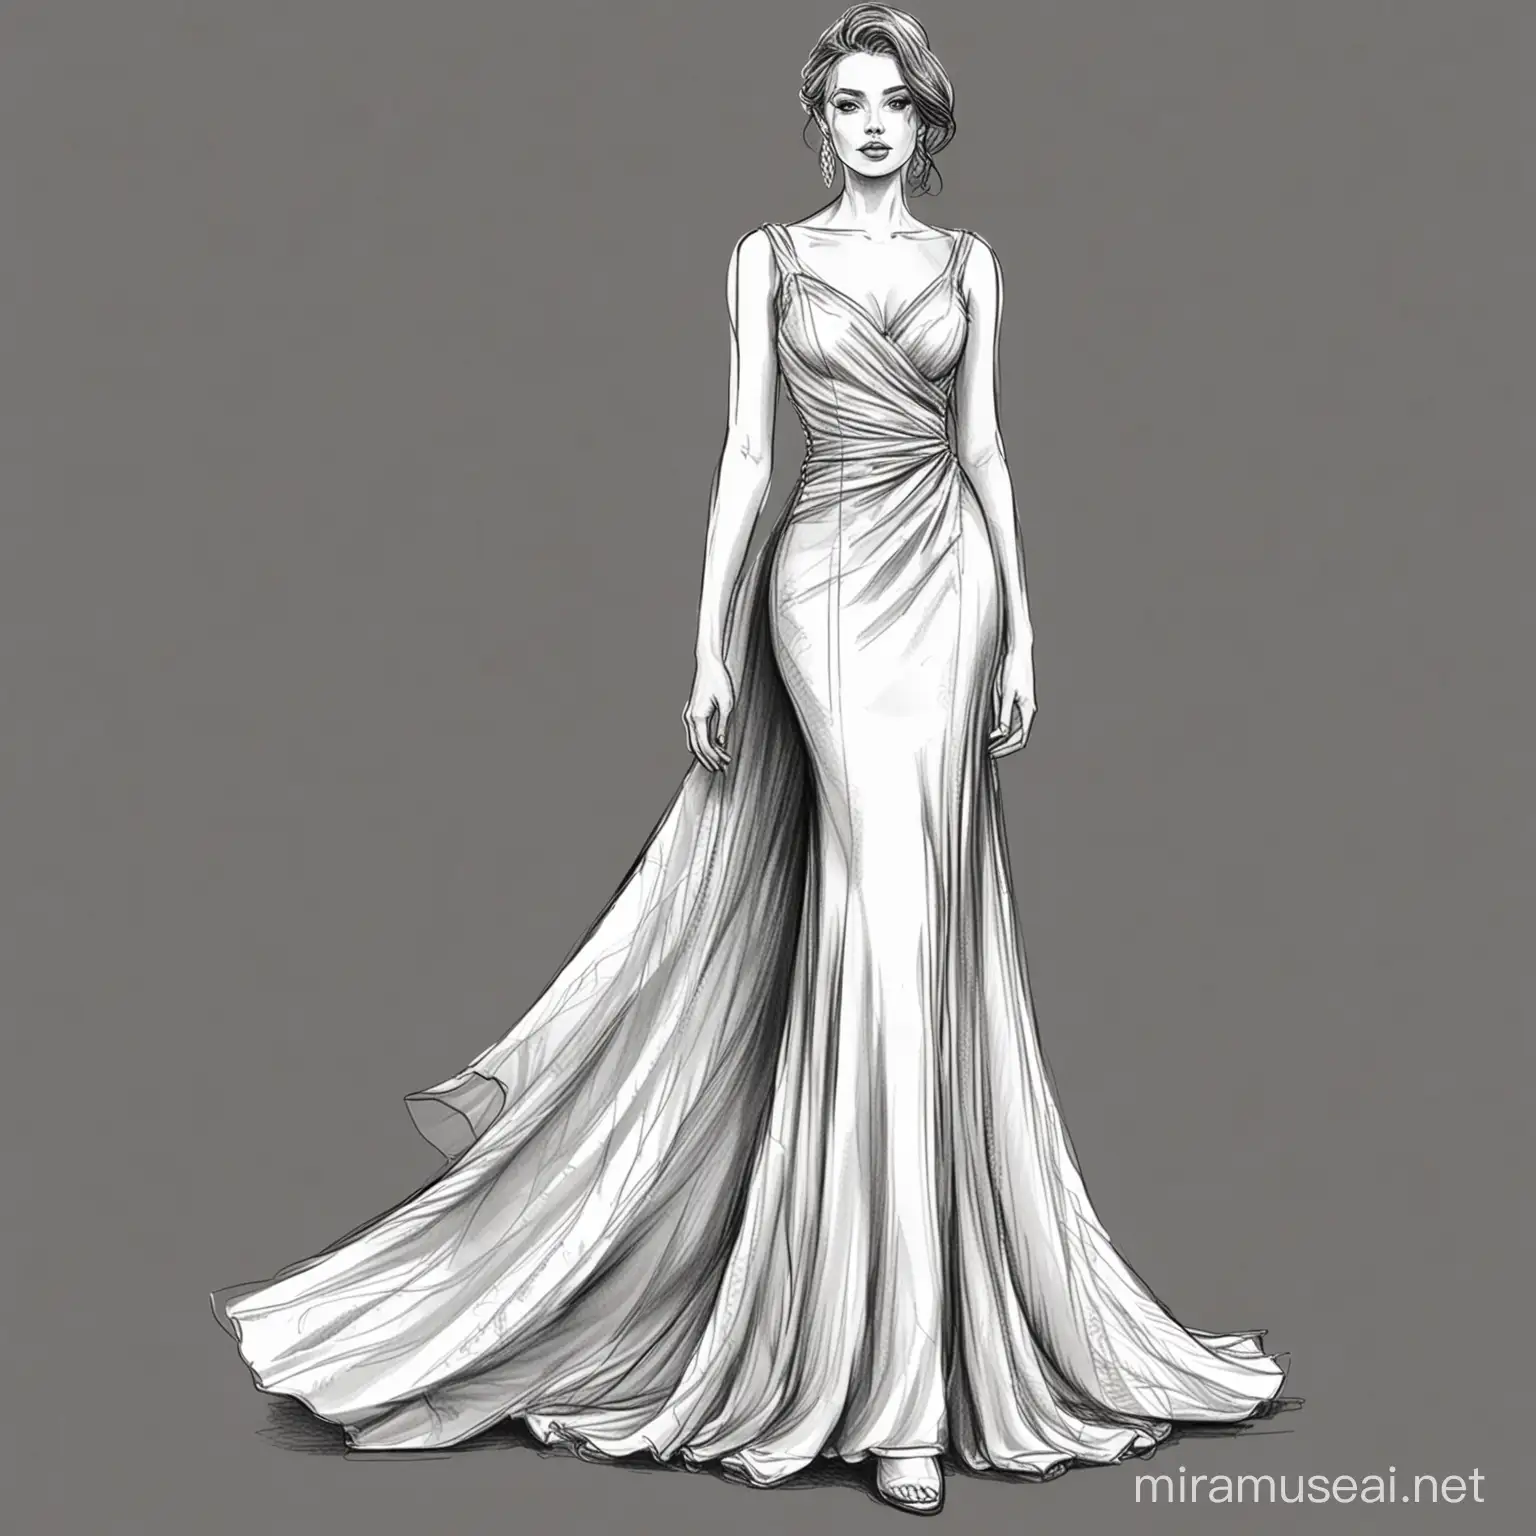 create an hand drawn evening wear dress for women in fashion illustration in black and white  line art  with out face